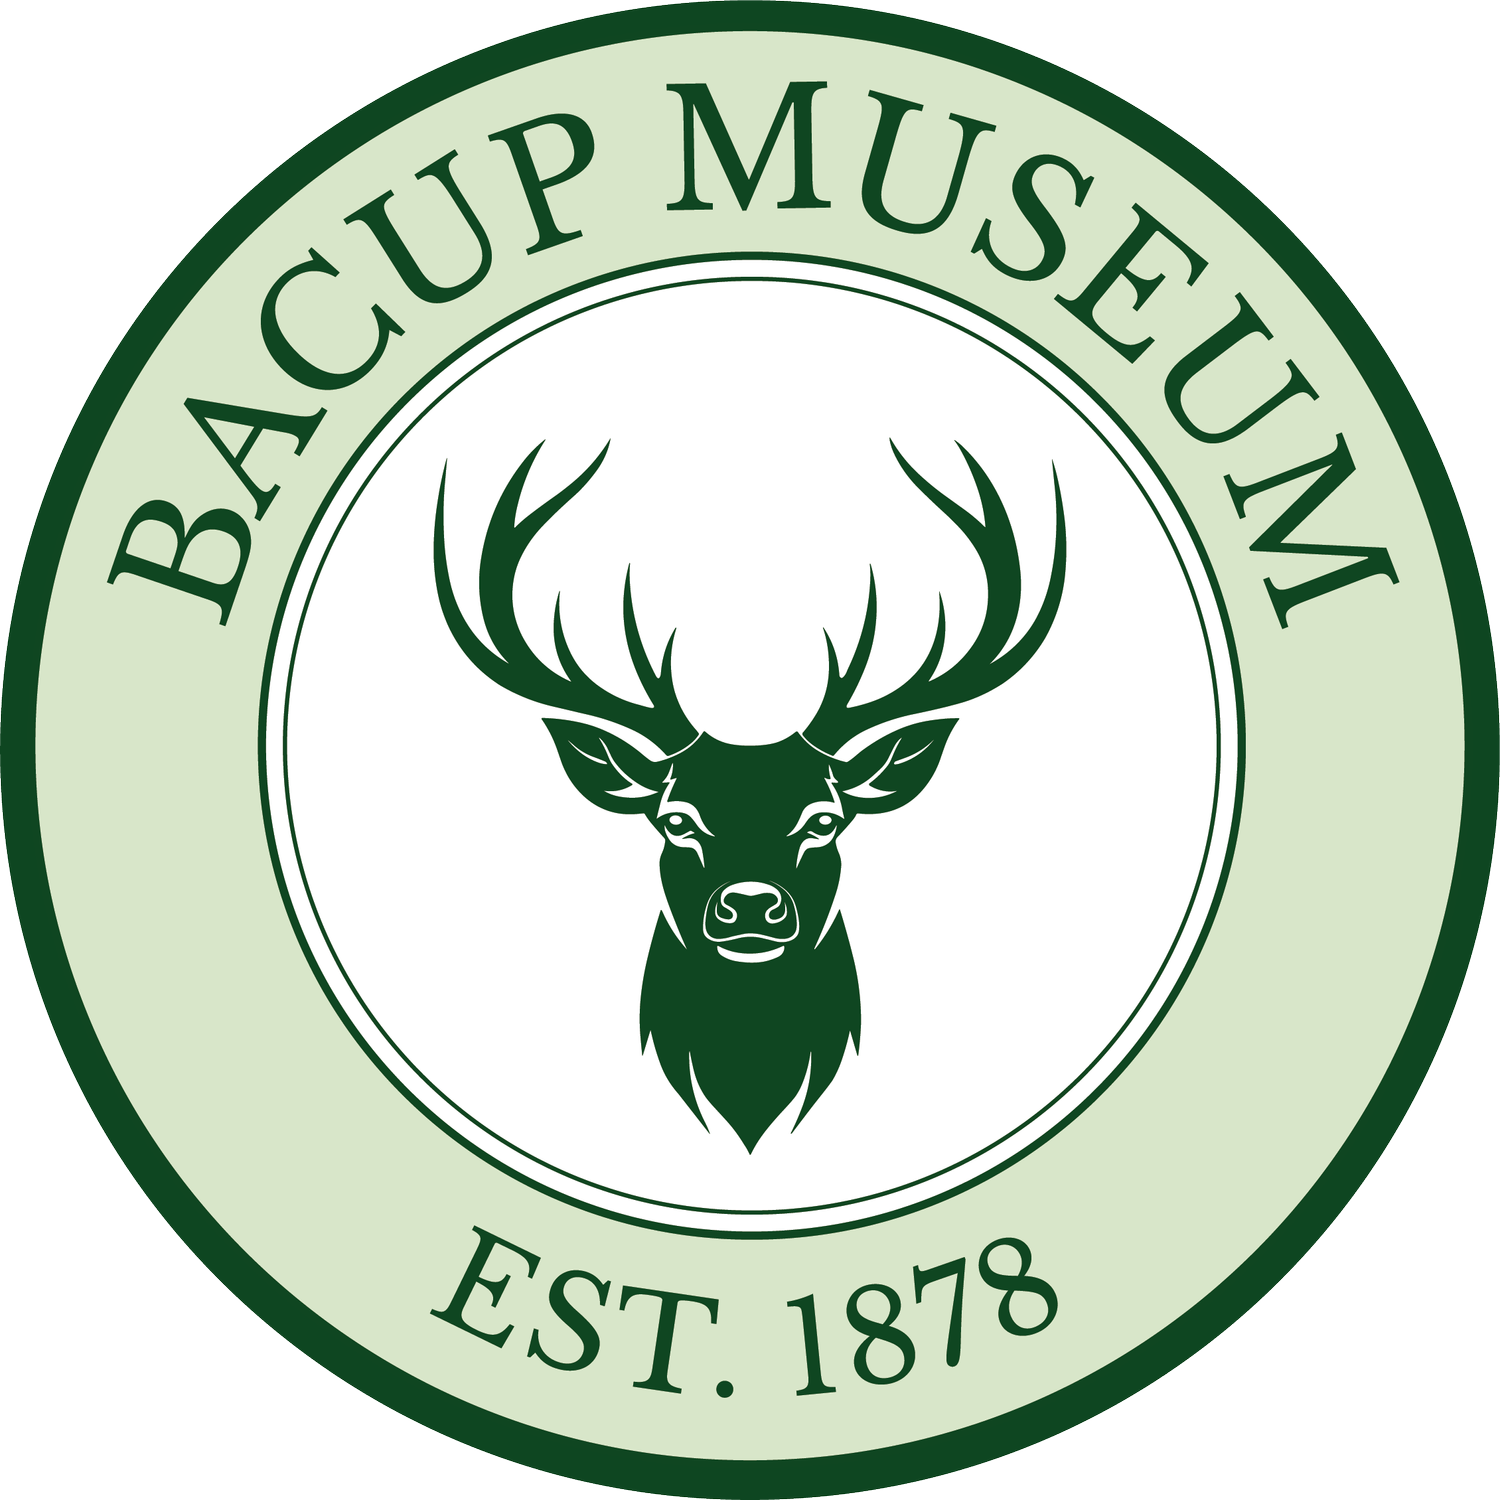 Bacup Museum